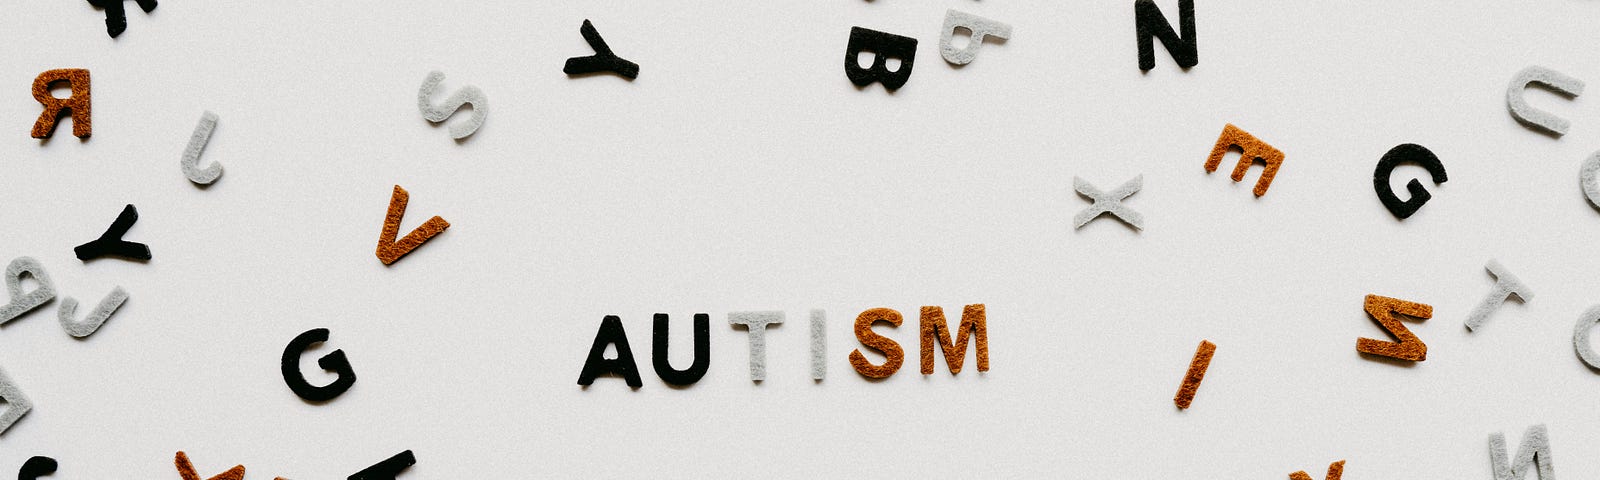 A white background with letters haphazardly displayed and the word AUTISM in the middle.